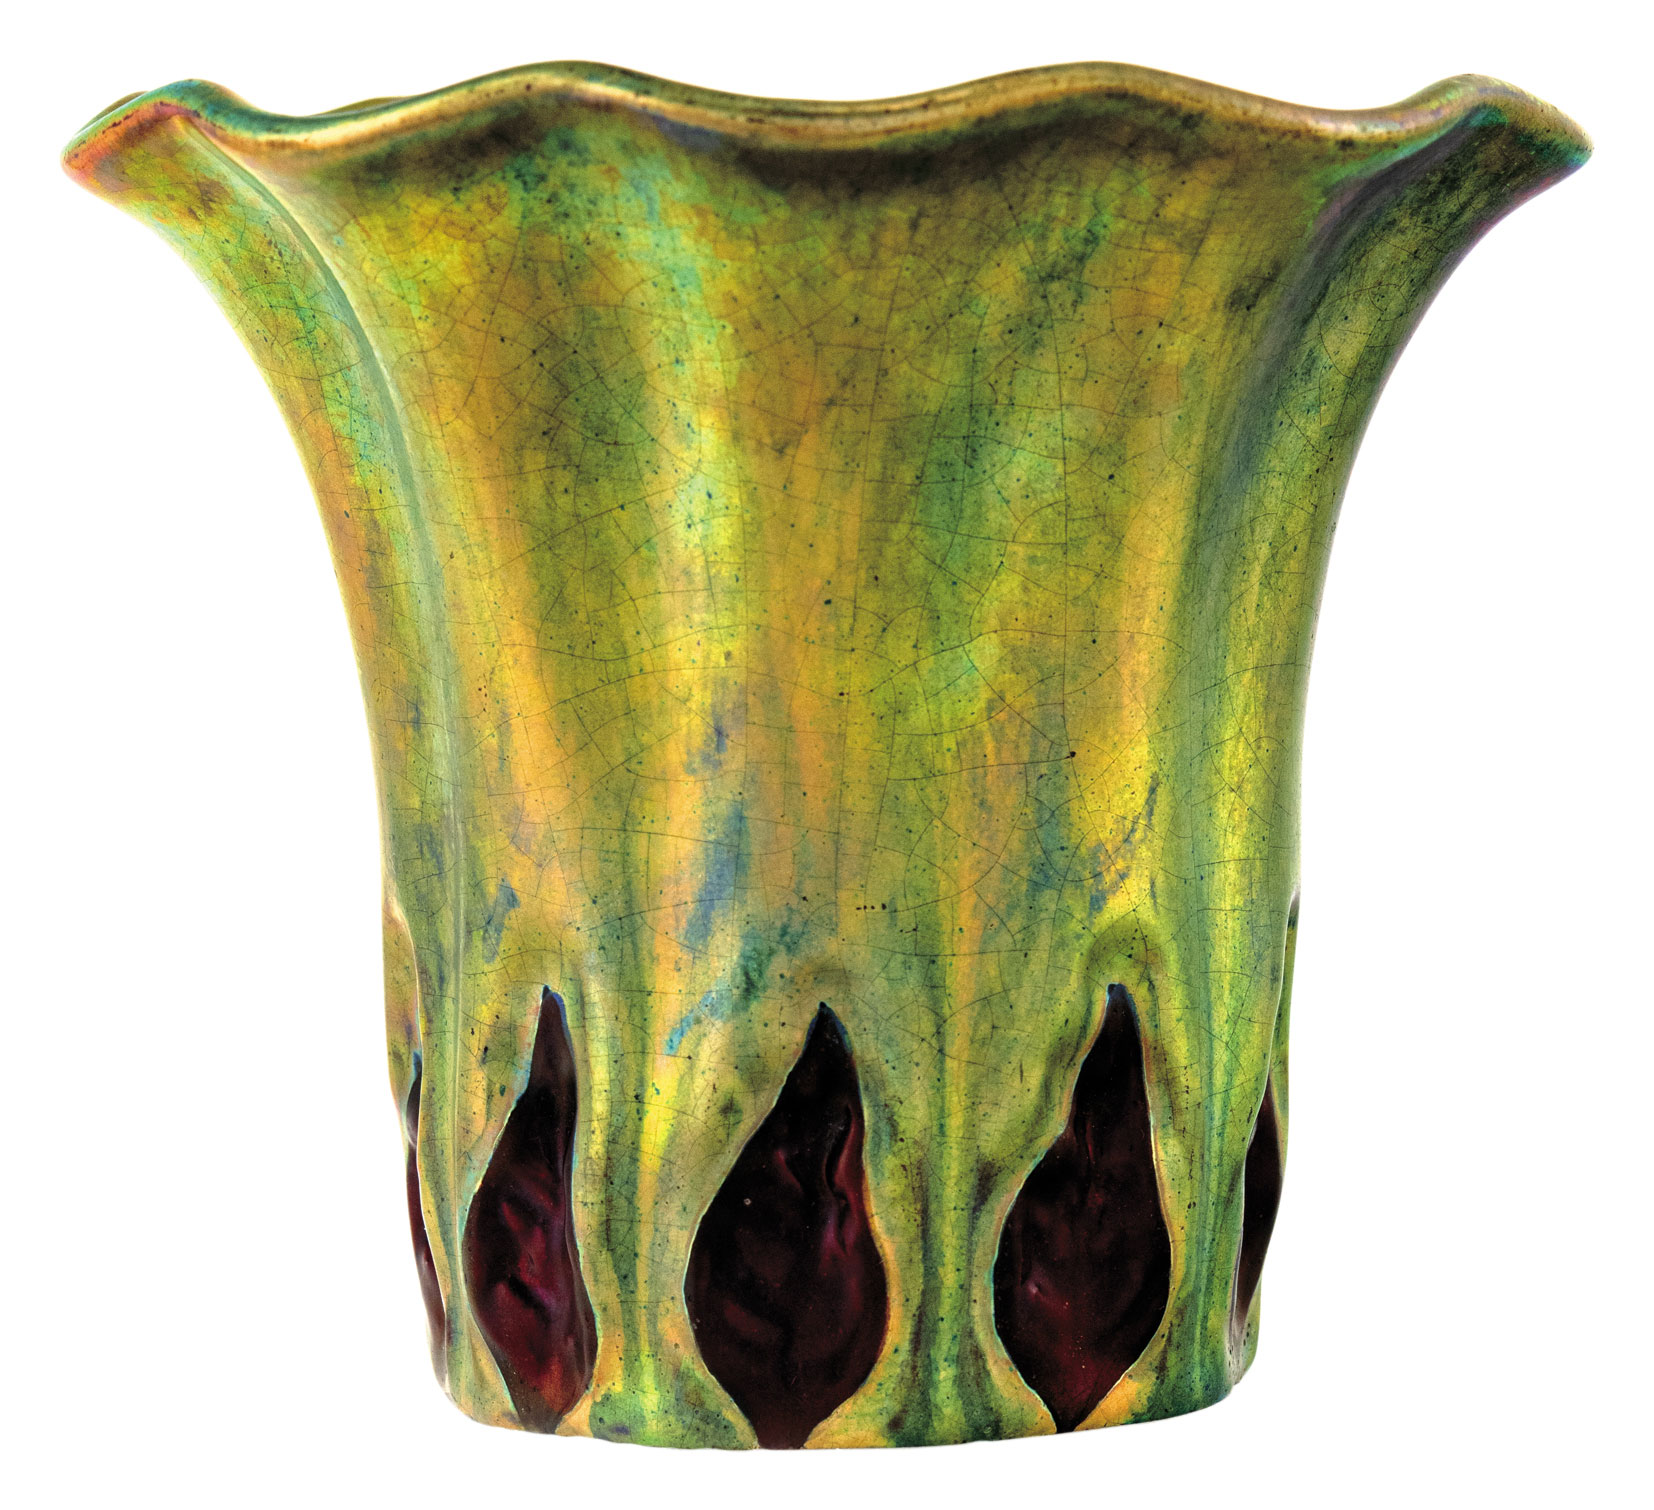 Zsolnay Ribbed Vase with flared Rim and Leaf Decoration, 1899